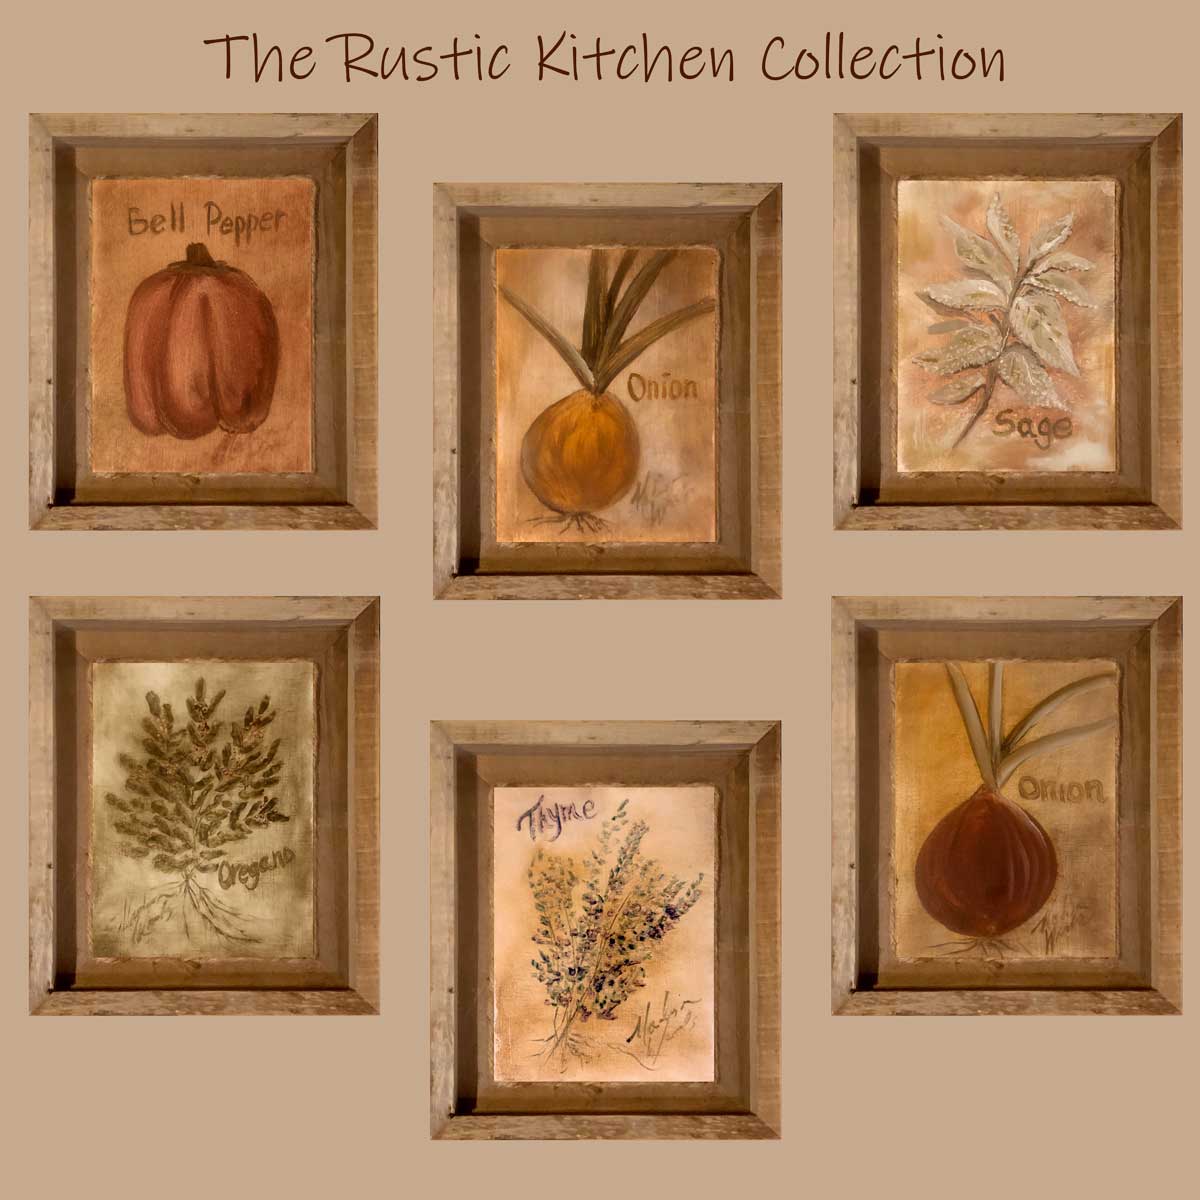 My Rustic Kitchen collection probably falls into the cottagecore aesthetic.